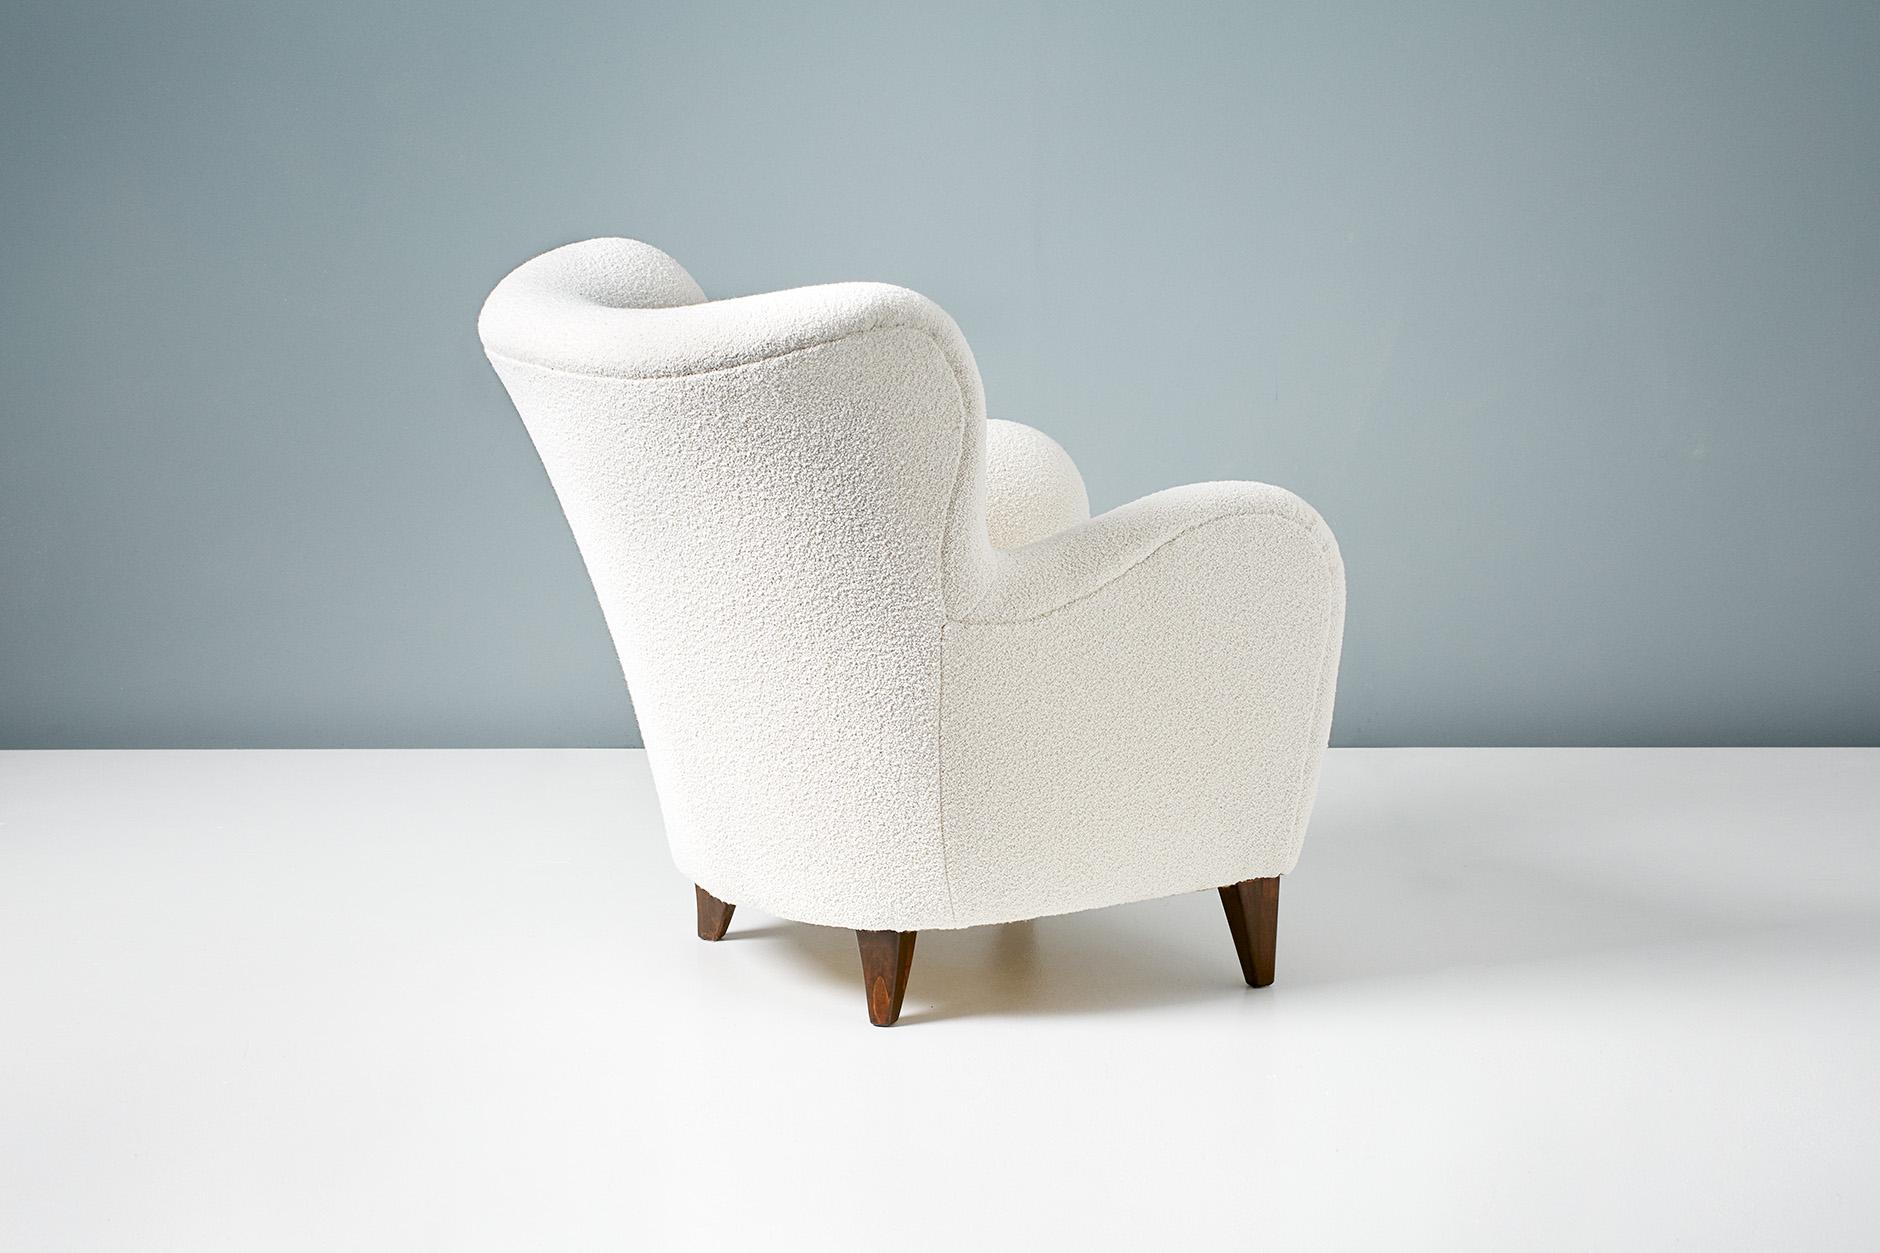 A pair of Danish cabinetmaker 1940s lounge chairs reupholstered in luxurious cotton-wool blend off-white bouclé fabric from Chase Erwin in England.

This pair of chairs were made in Denmark in the 1940s in the manner of Flemming Lassen, Fritz